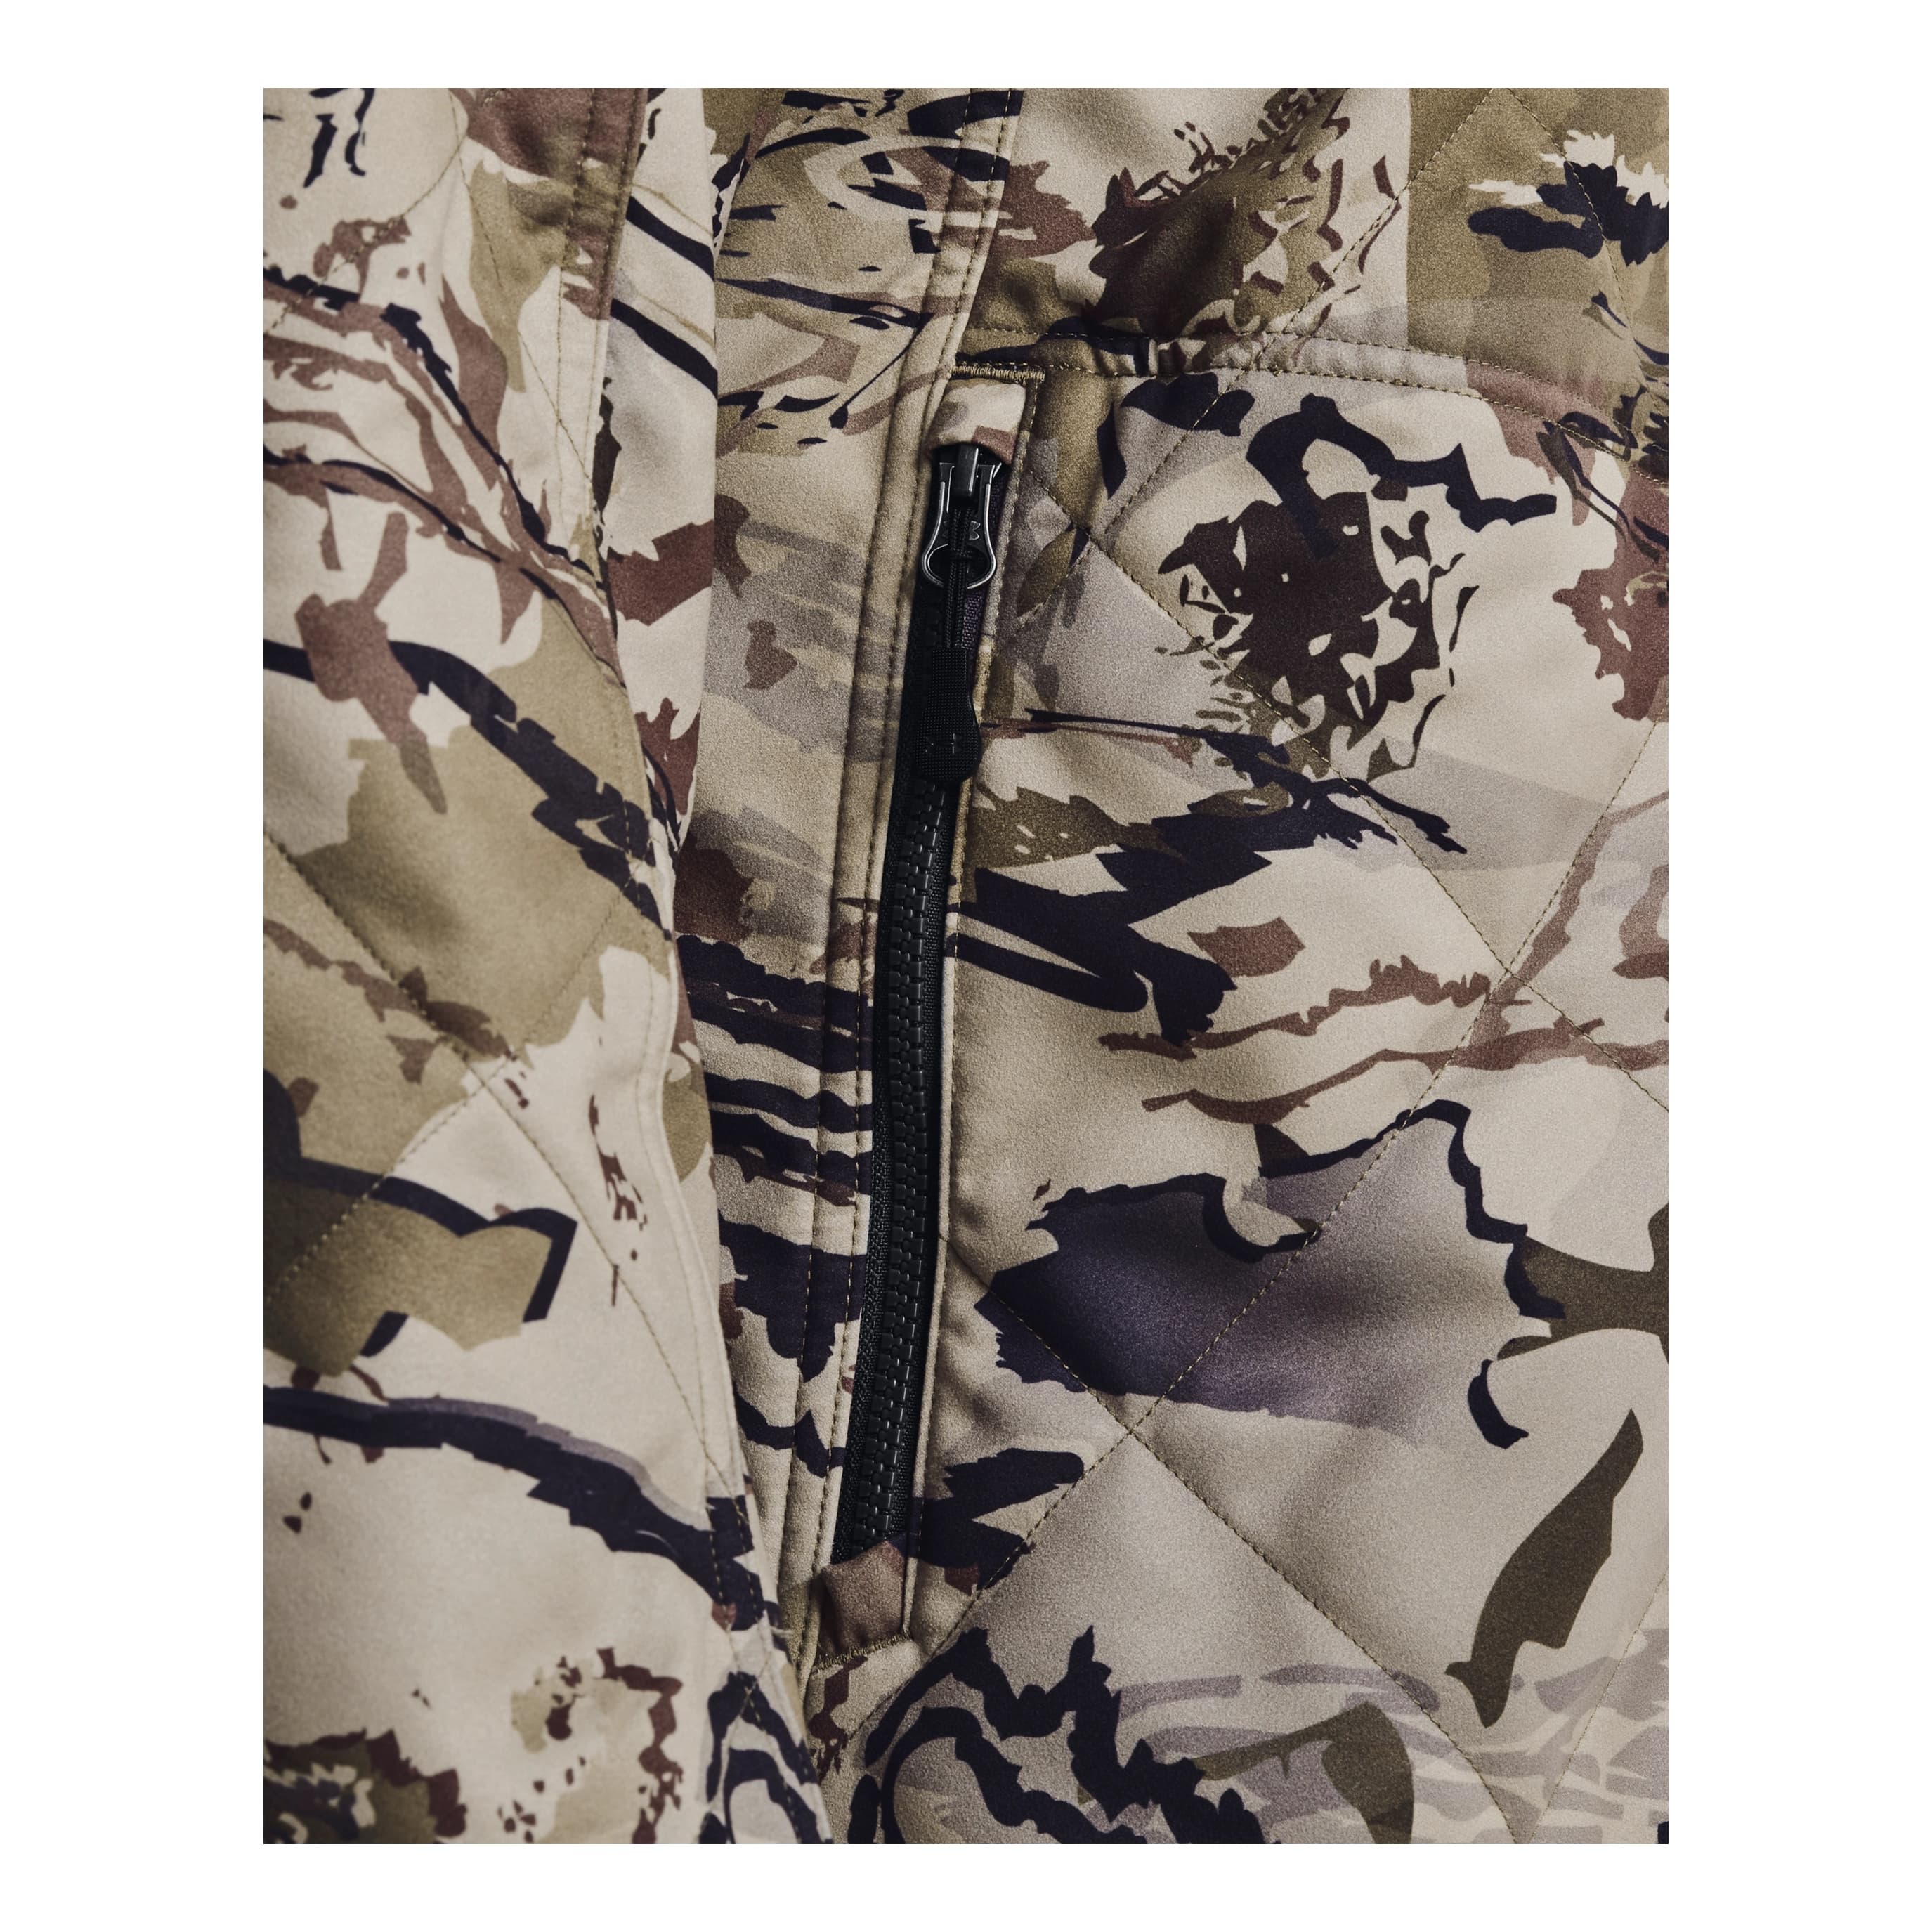 Under Armour Brow Tine ColdGear Infrared Jacket - Presleys Outdoors